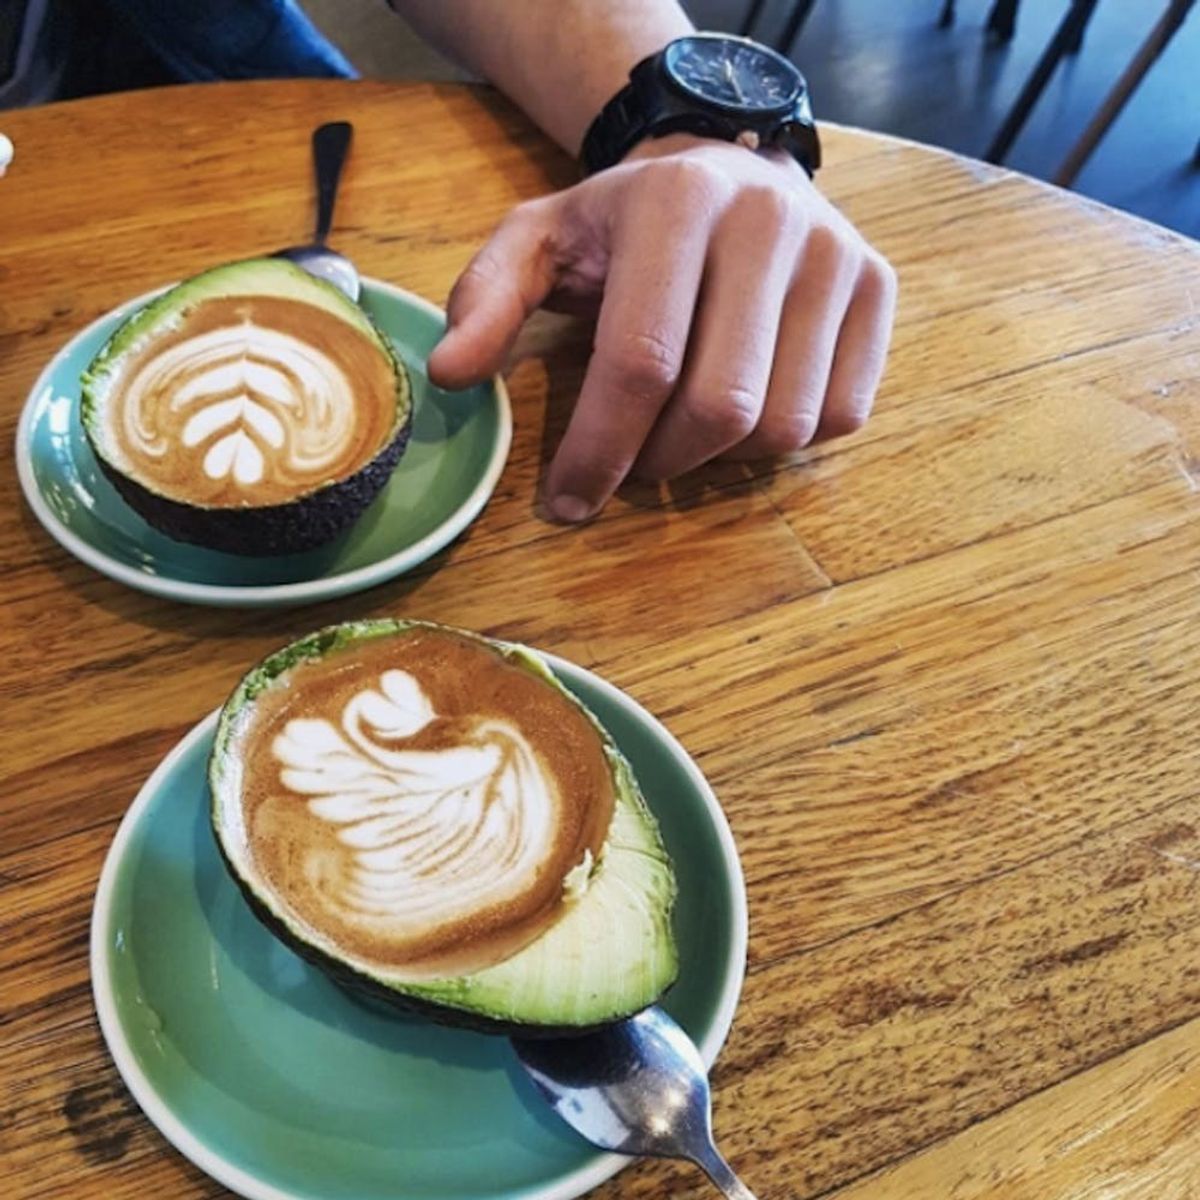 Avolattes Are the Latest Coffee Trend, and They’re WAY Healthier Than the Unicorn Frapp